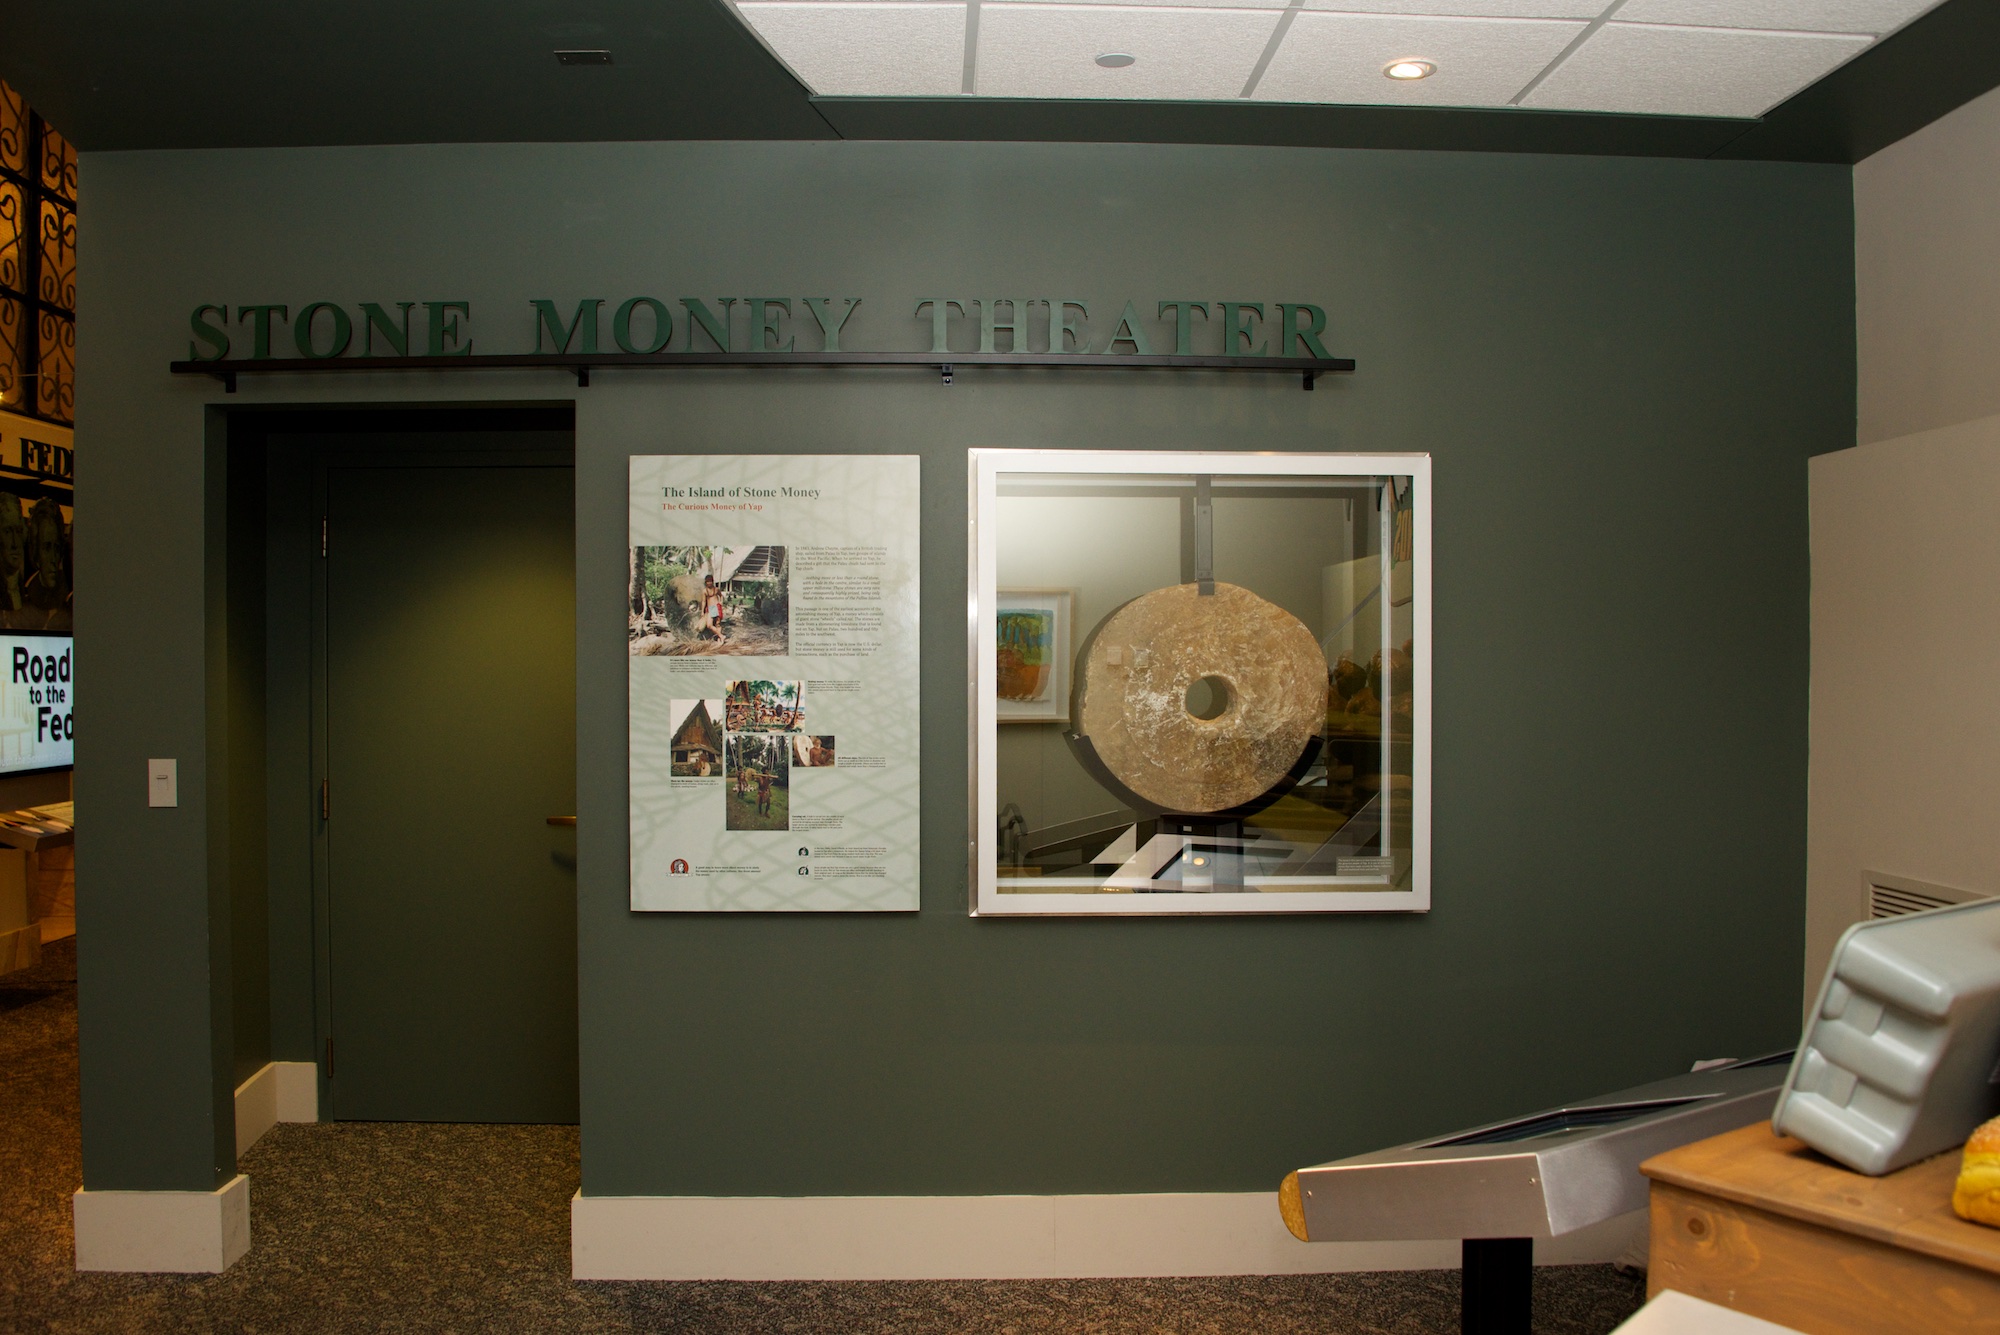 Photo of Interior of the Money Museum in Cleveland